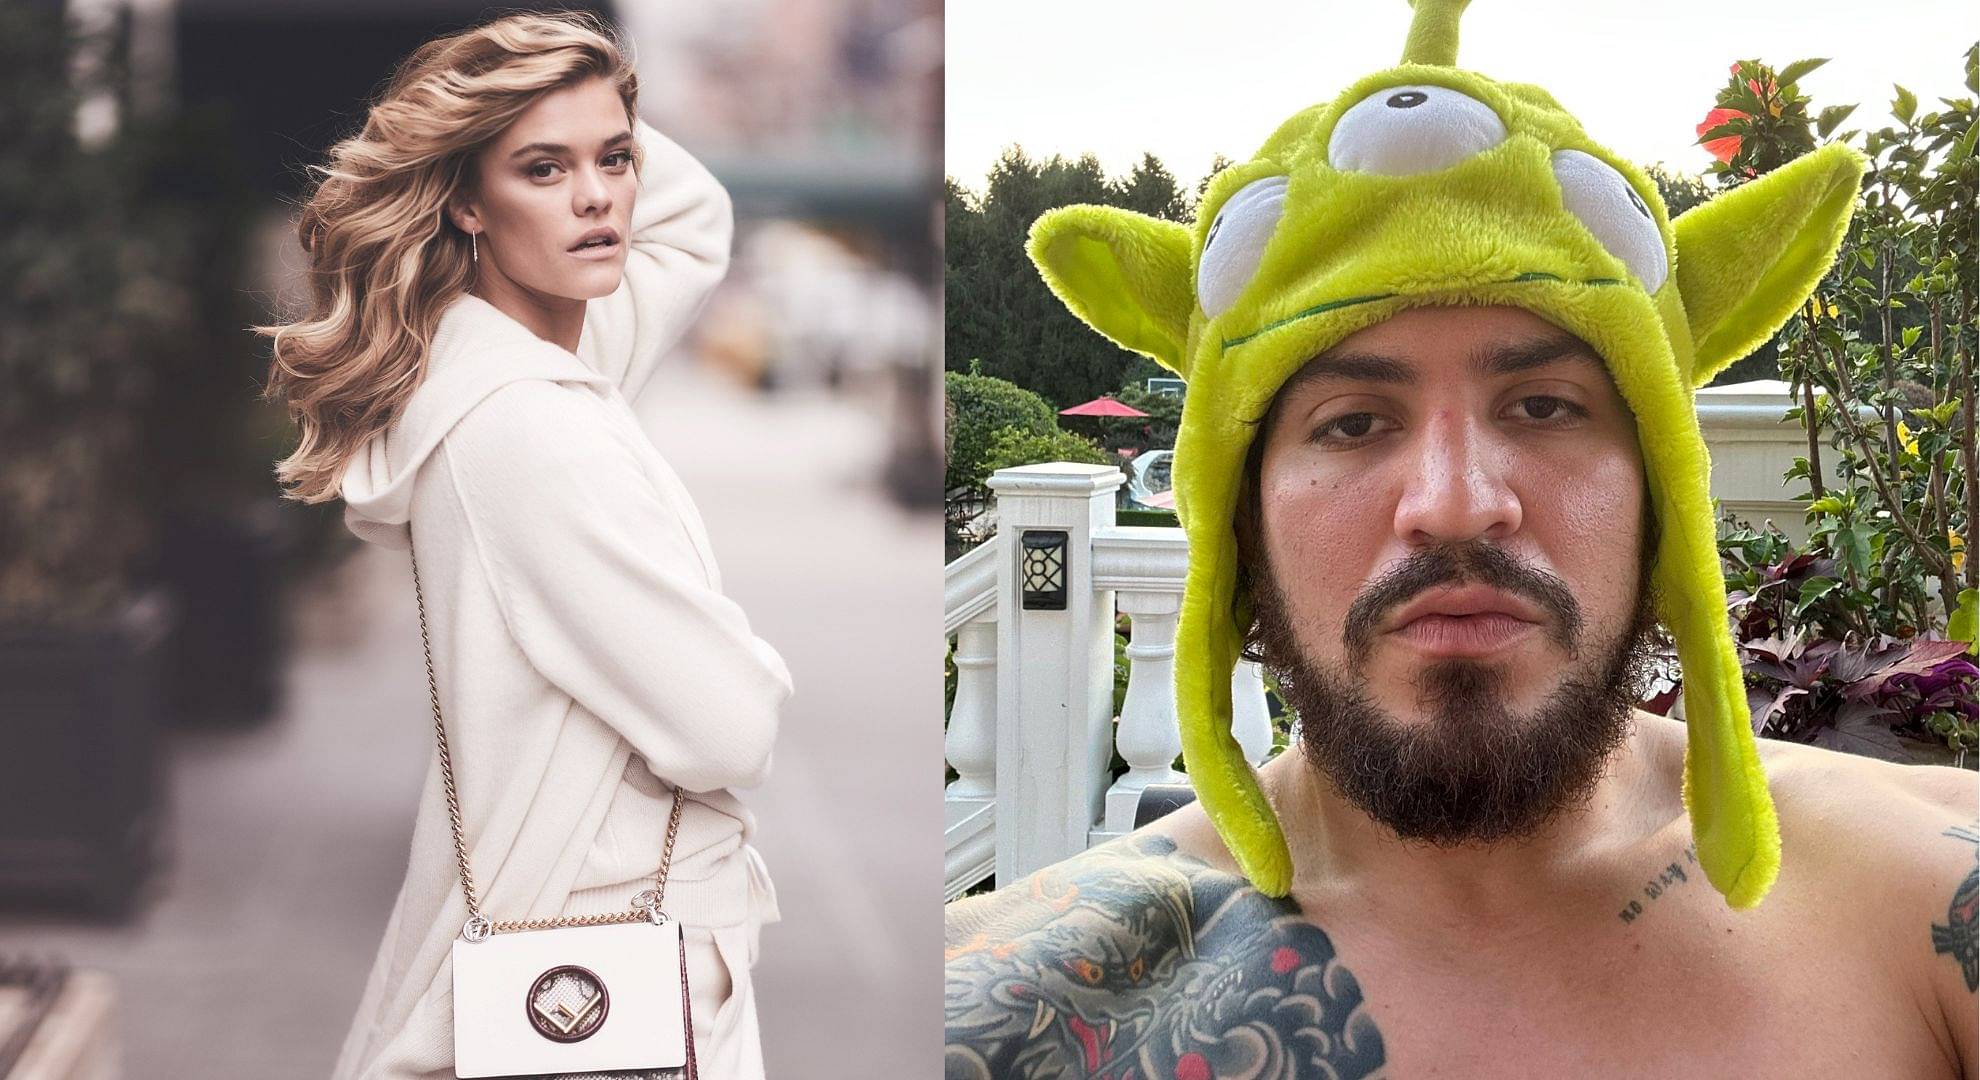 “Dealing With Lawyers”: Dillon Danis Provides Negative Update on Logan Paul’s Fiancee Nina Adgal Lawsuit